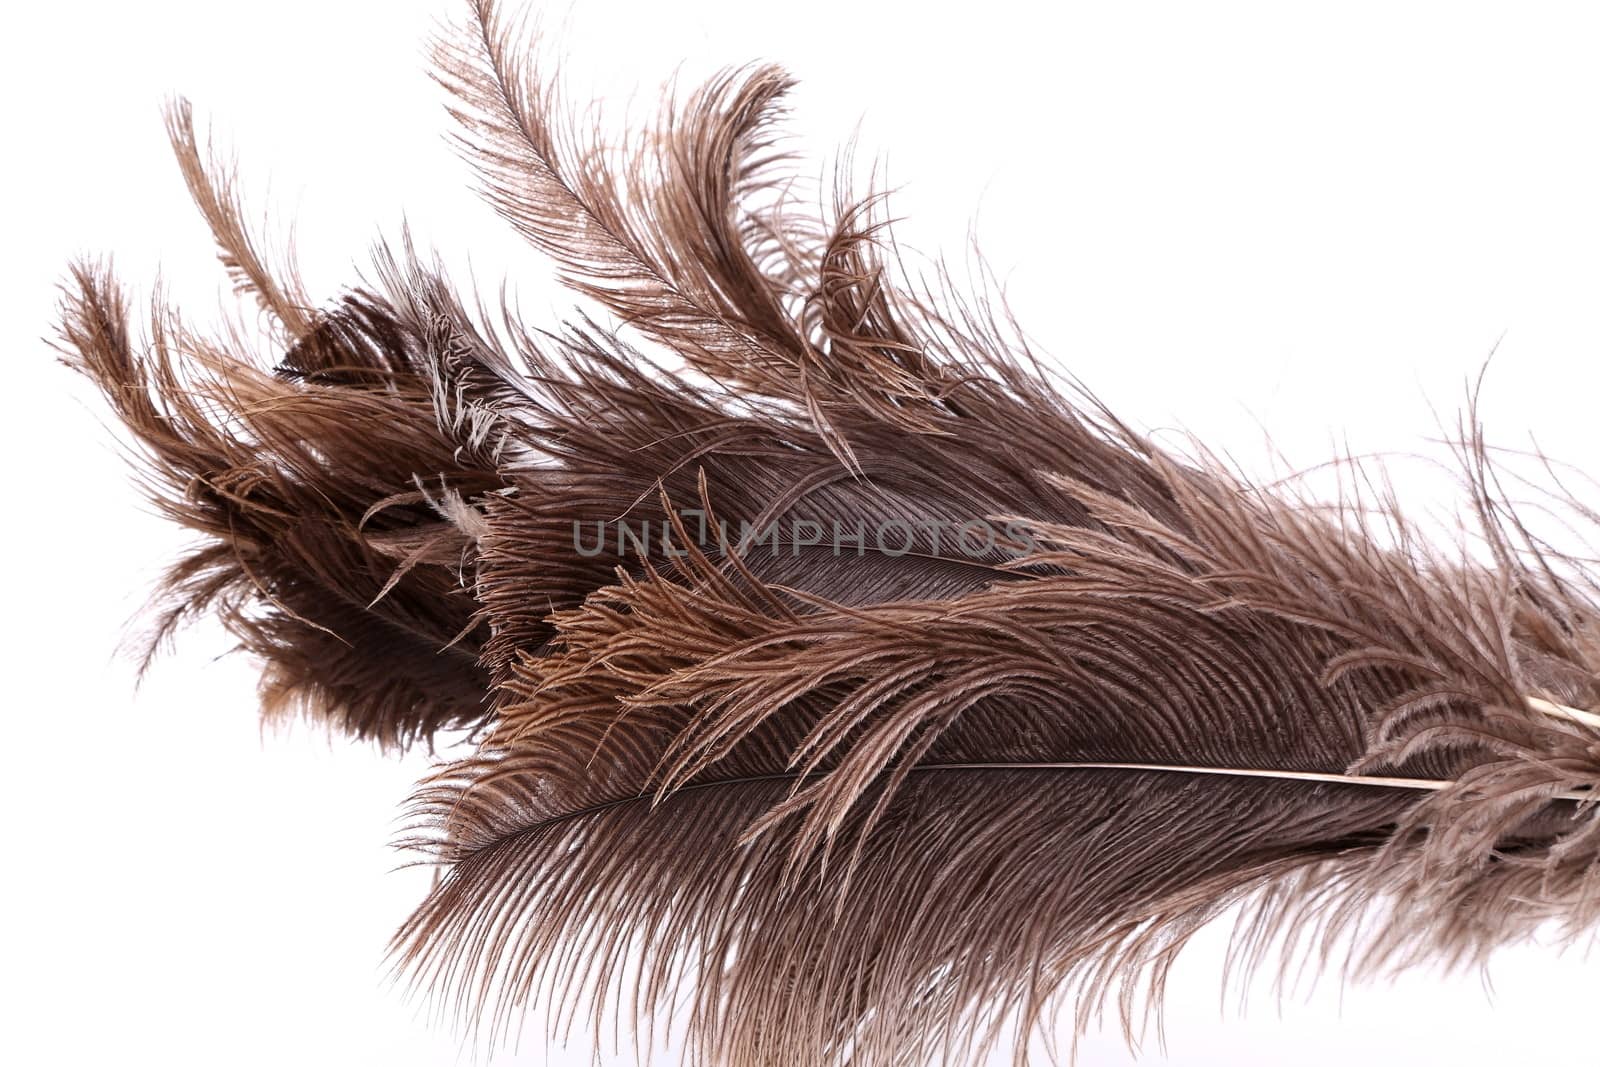 End feather duster by indigolotos